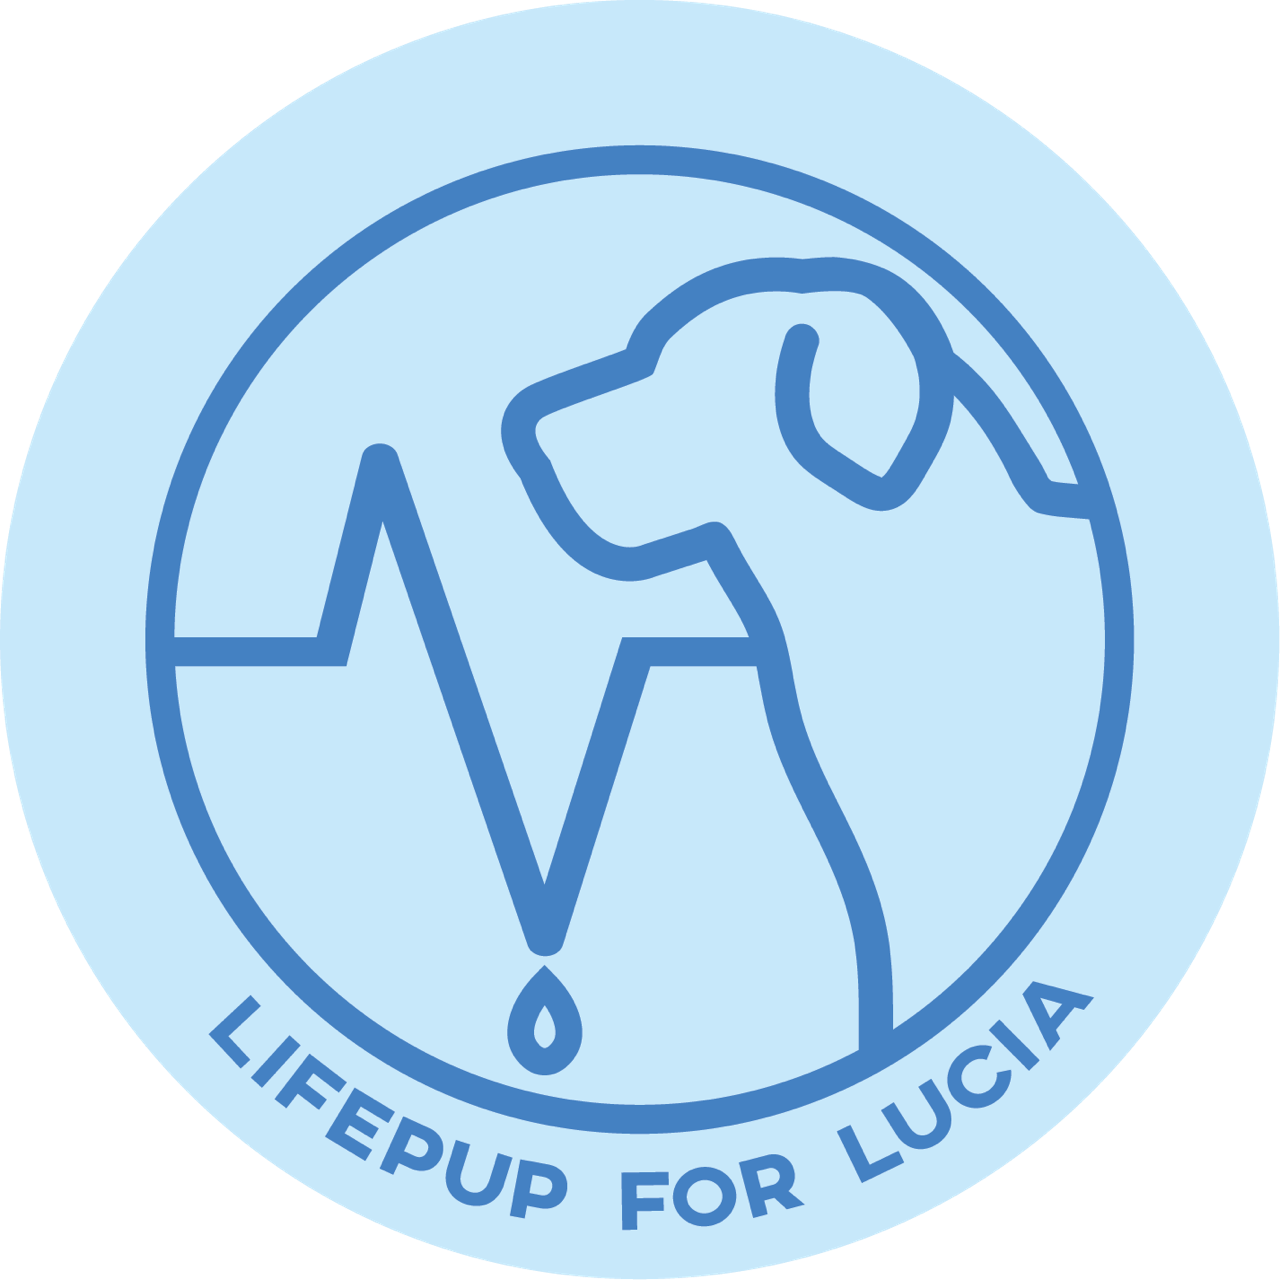 LifePup for Lucia